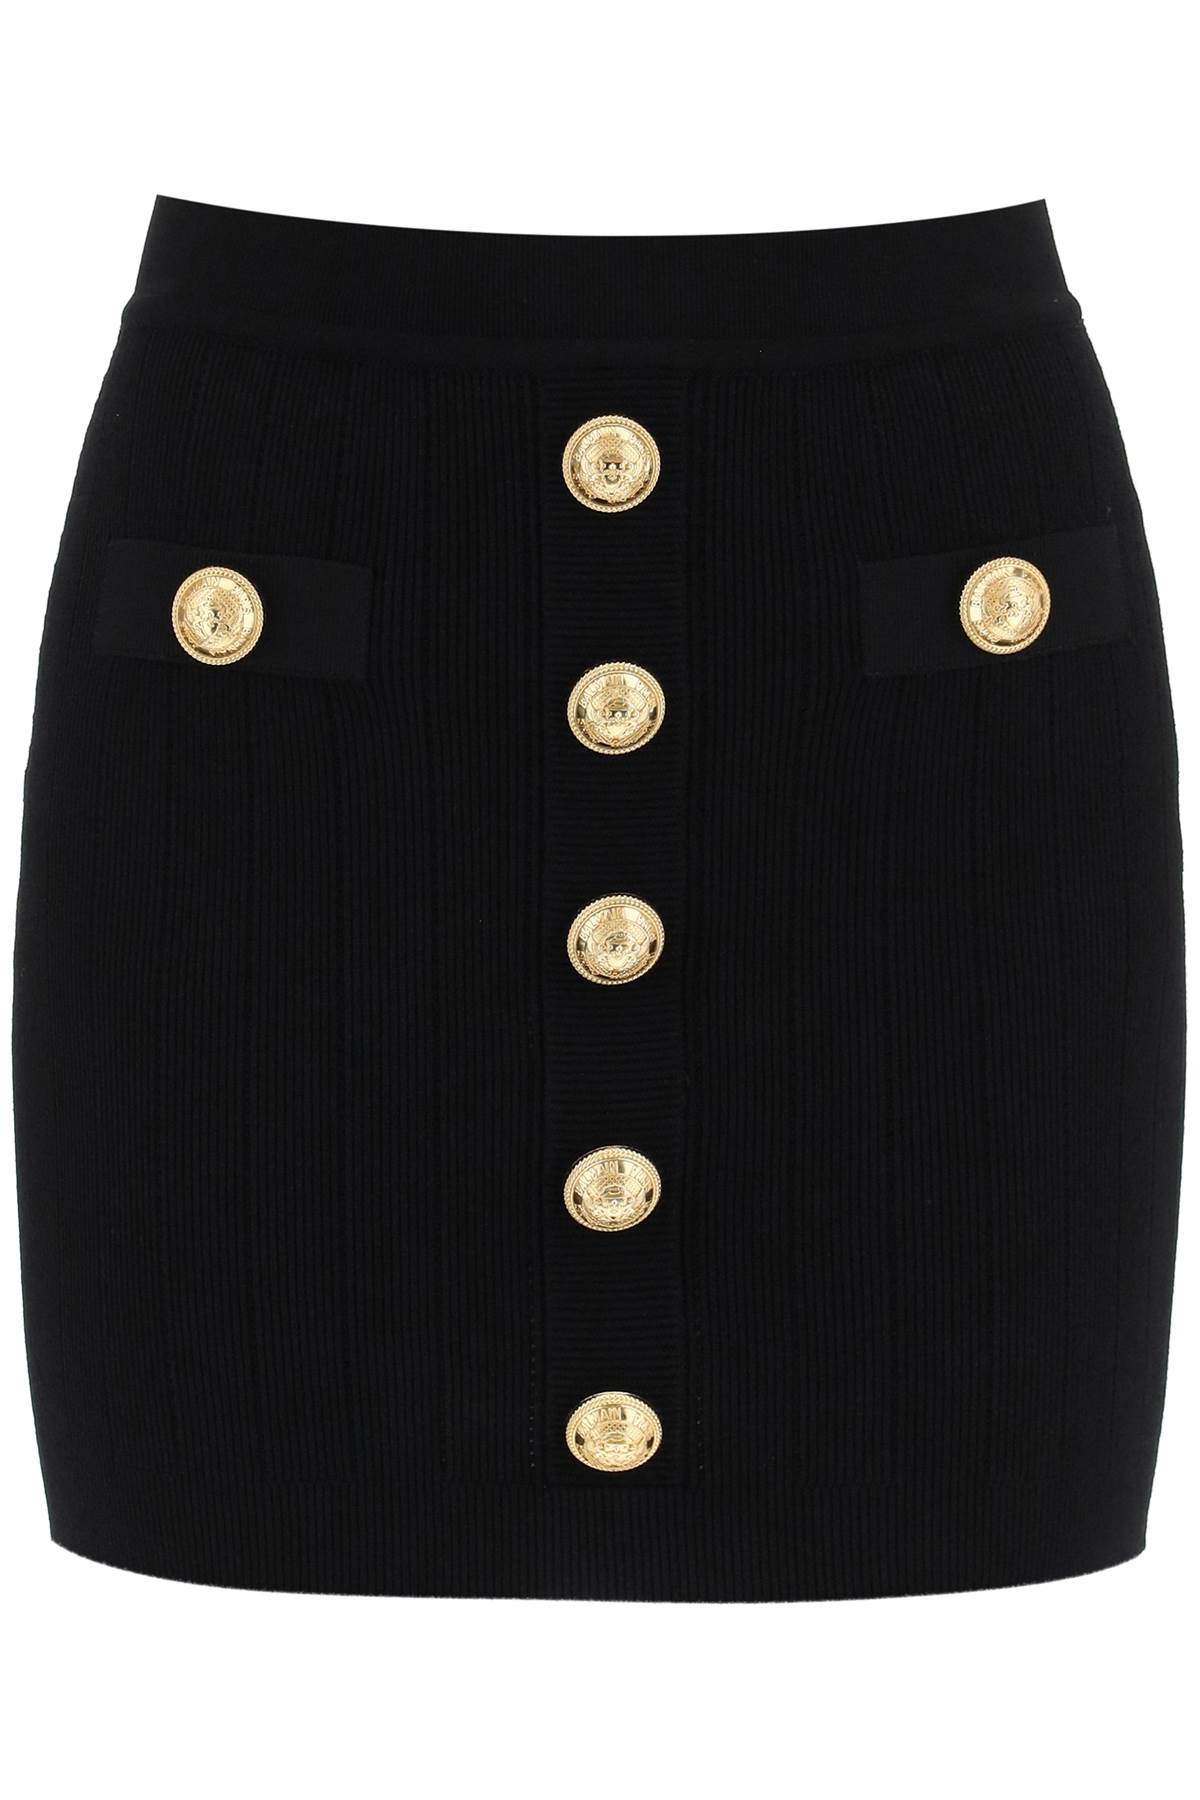 Balmain Knit Mini Skirt With Embossed Buttons In Nero